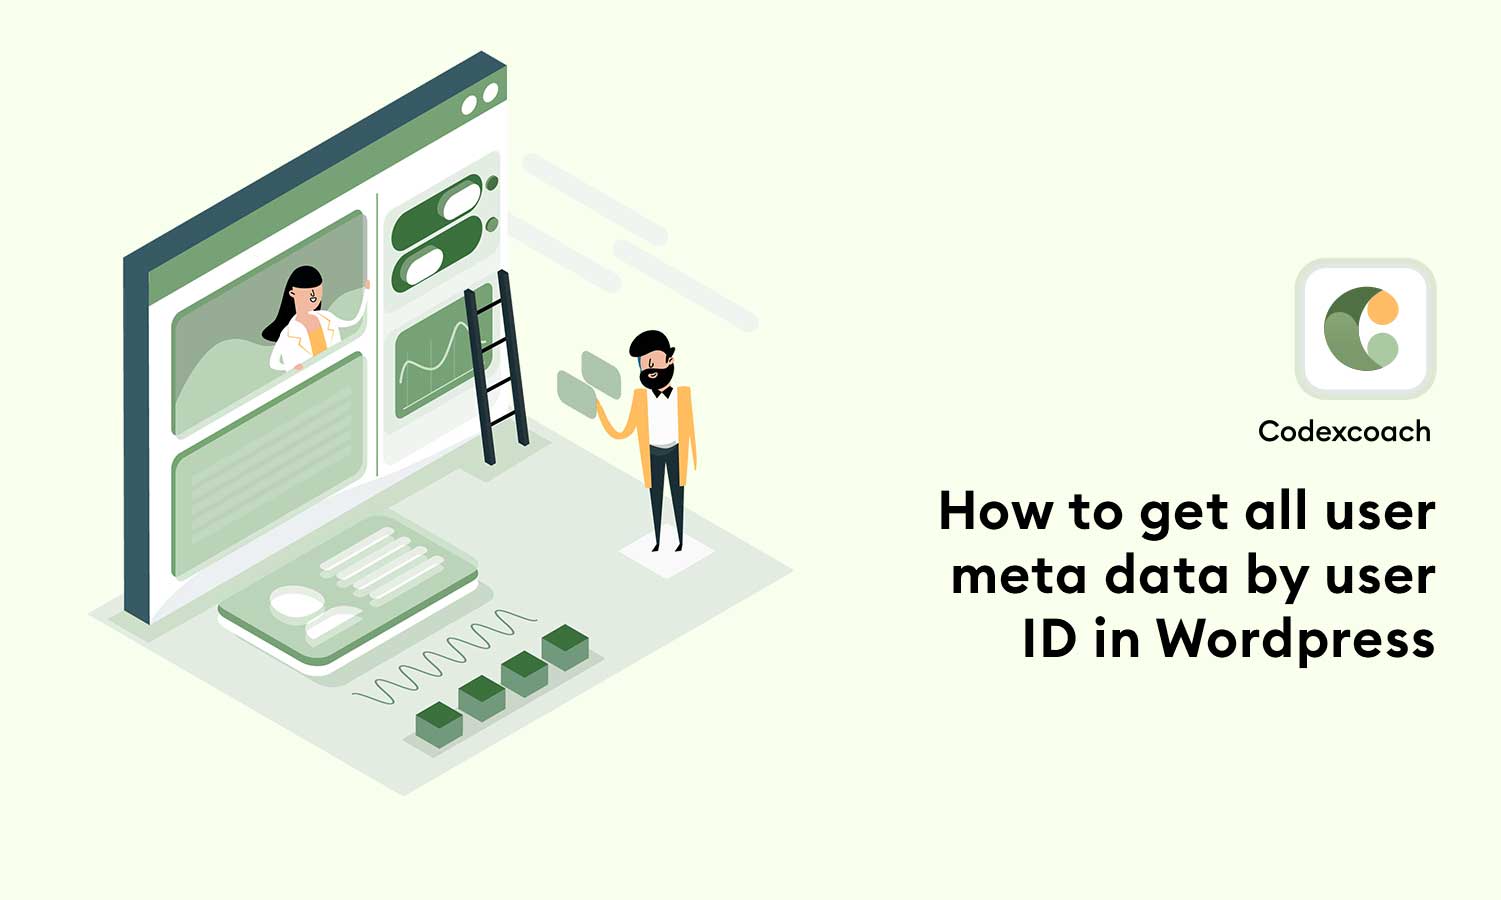 How-to-get-all-user-meta-data-by-user-ID-in-Wordpress